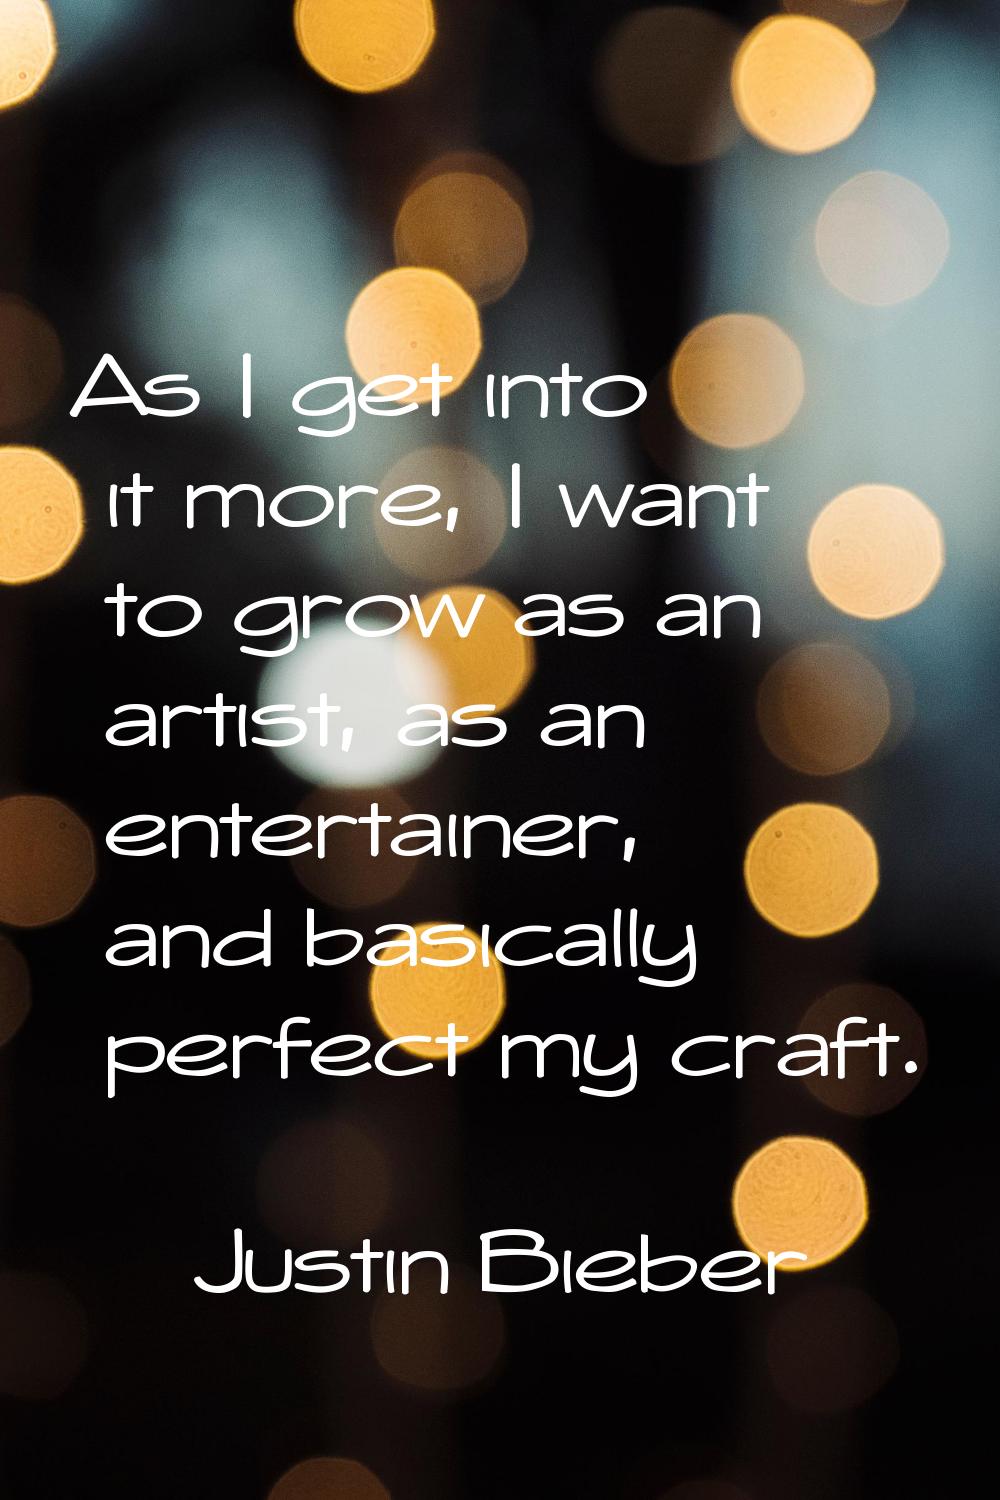 As I get into it more, I want to grow as an artist, as an entertainer, and basically perfect my cra